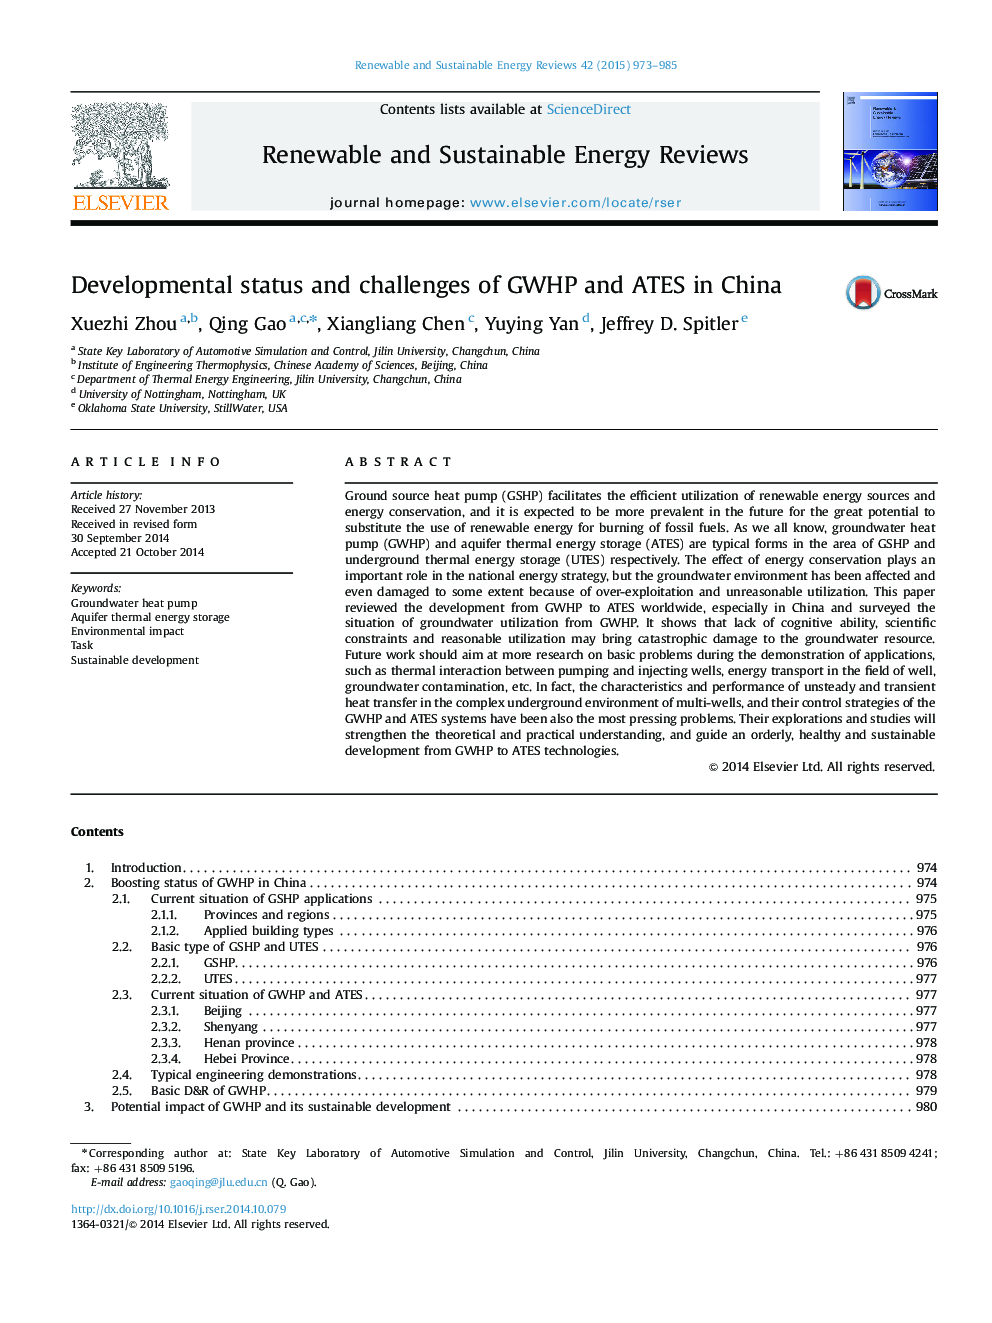 Developmental status and challenges of GWHP and ATES in China